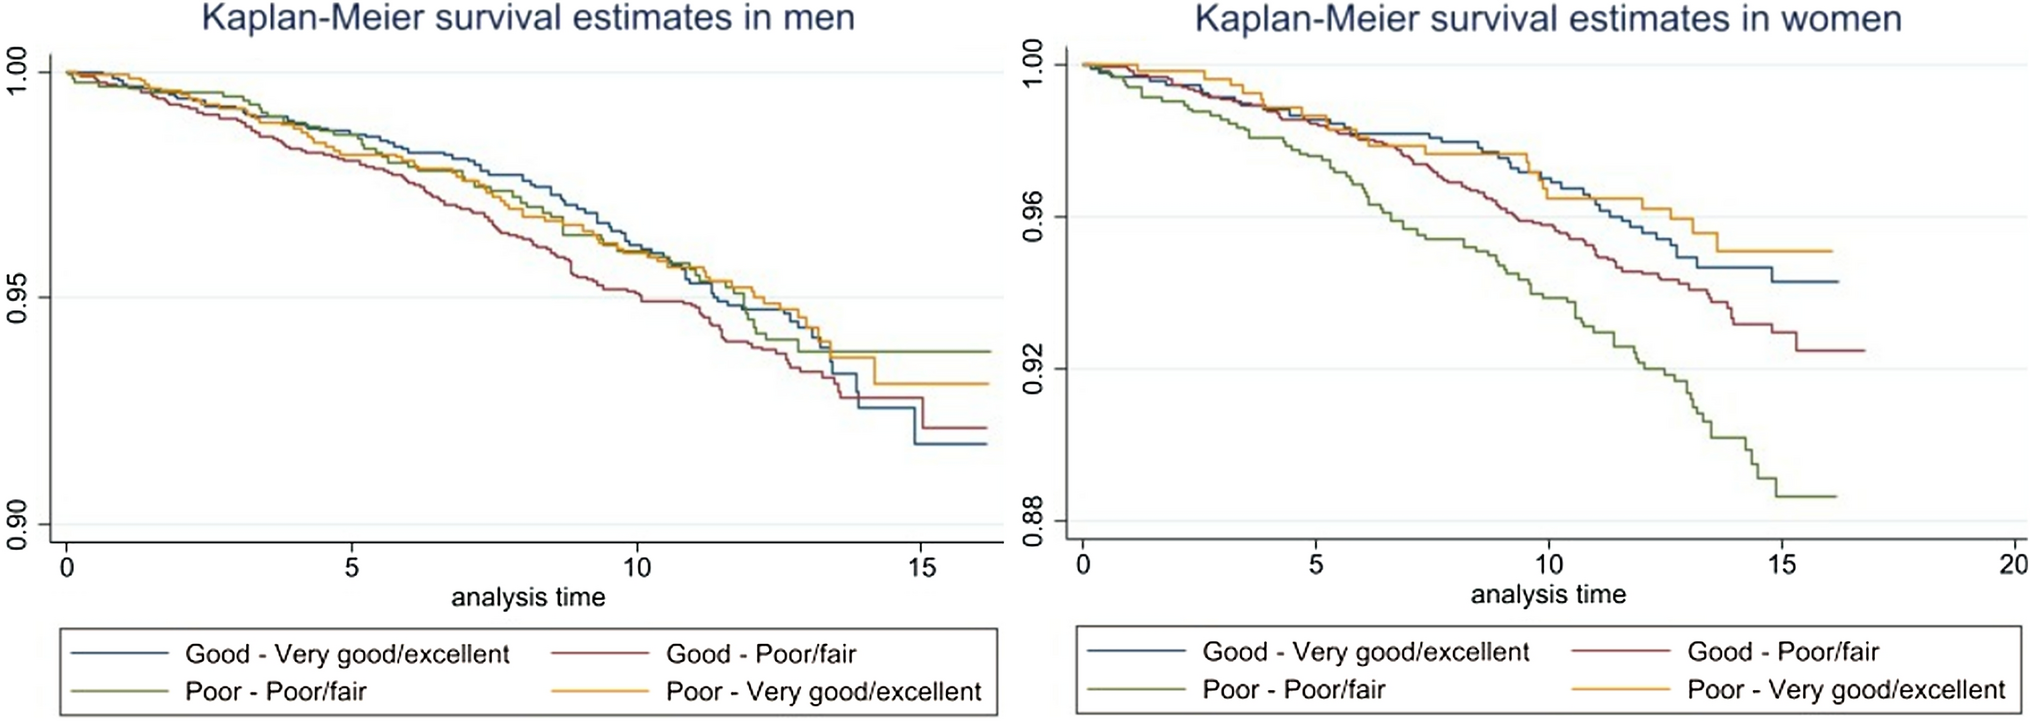 Association between changed self-rated health and the risk of venous thromboembolism in Malmö Preventive Program: a cohort study